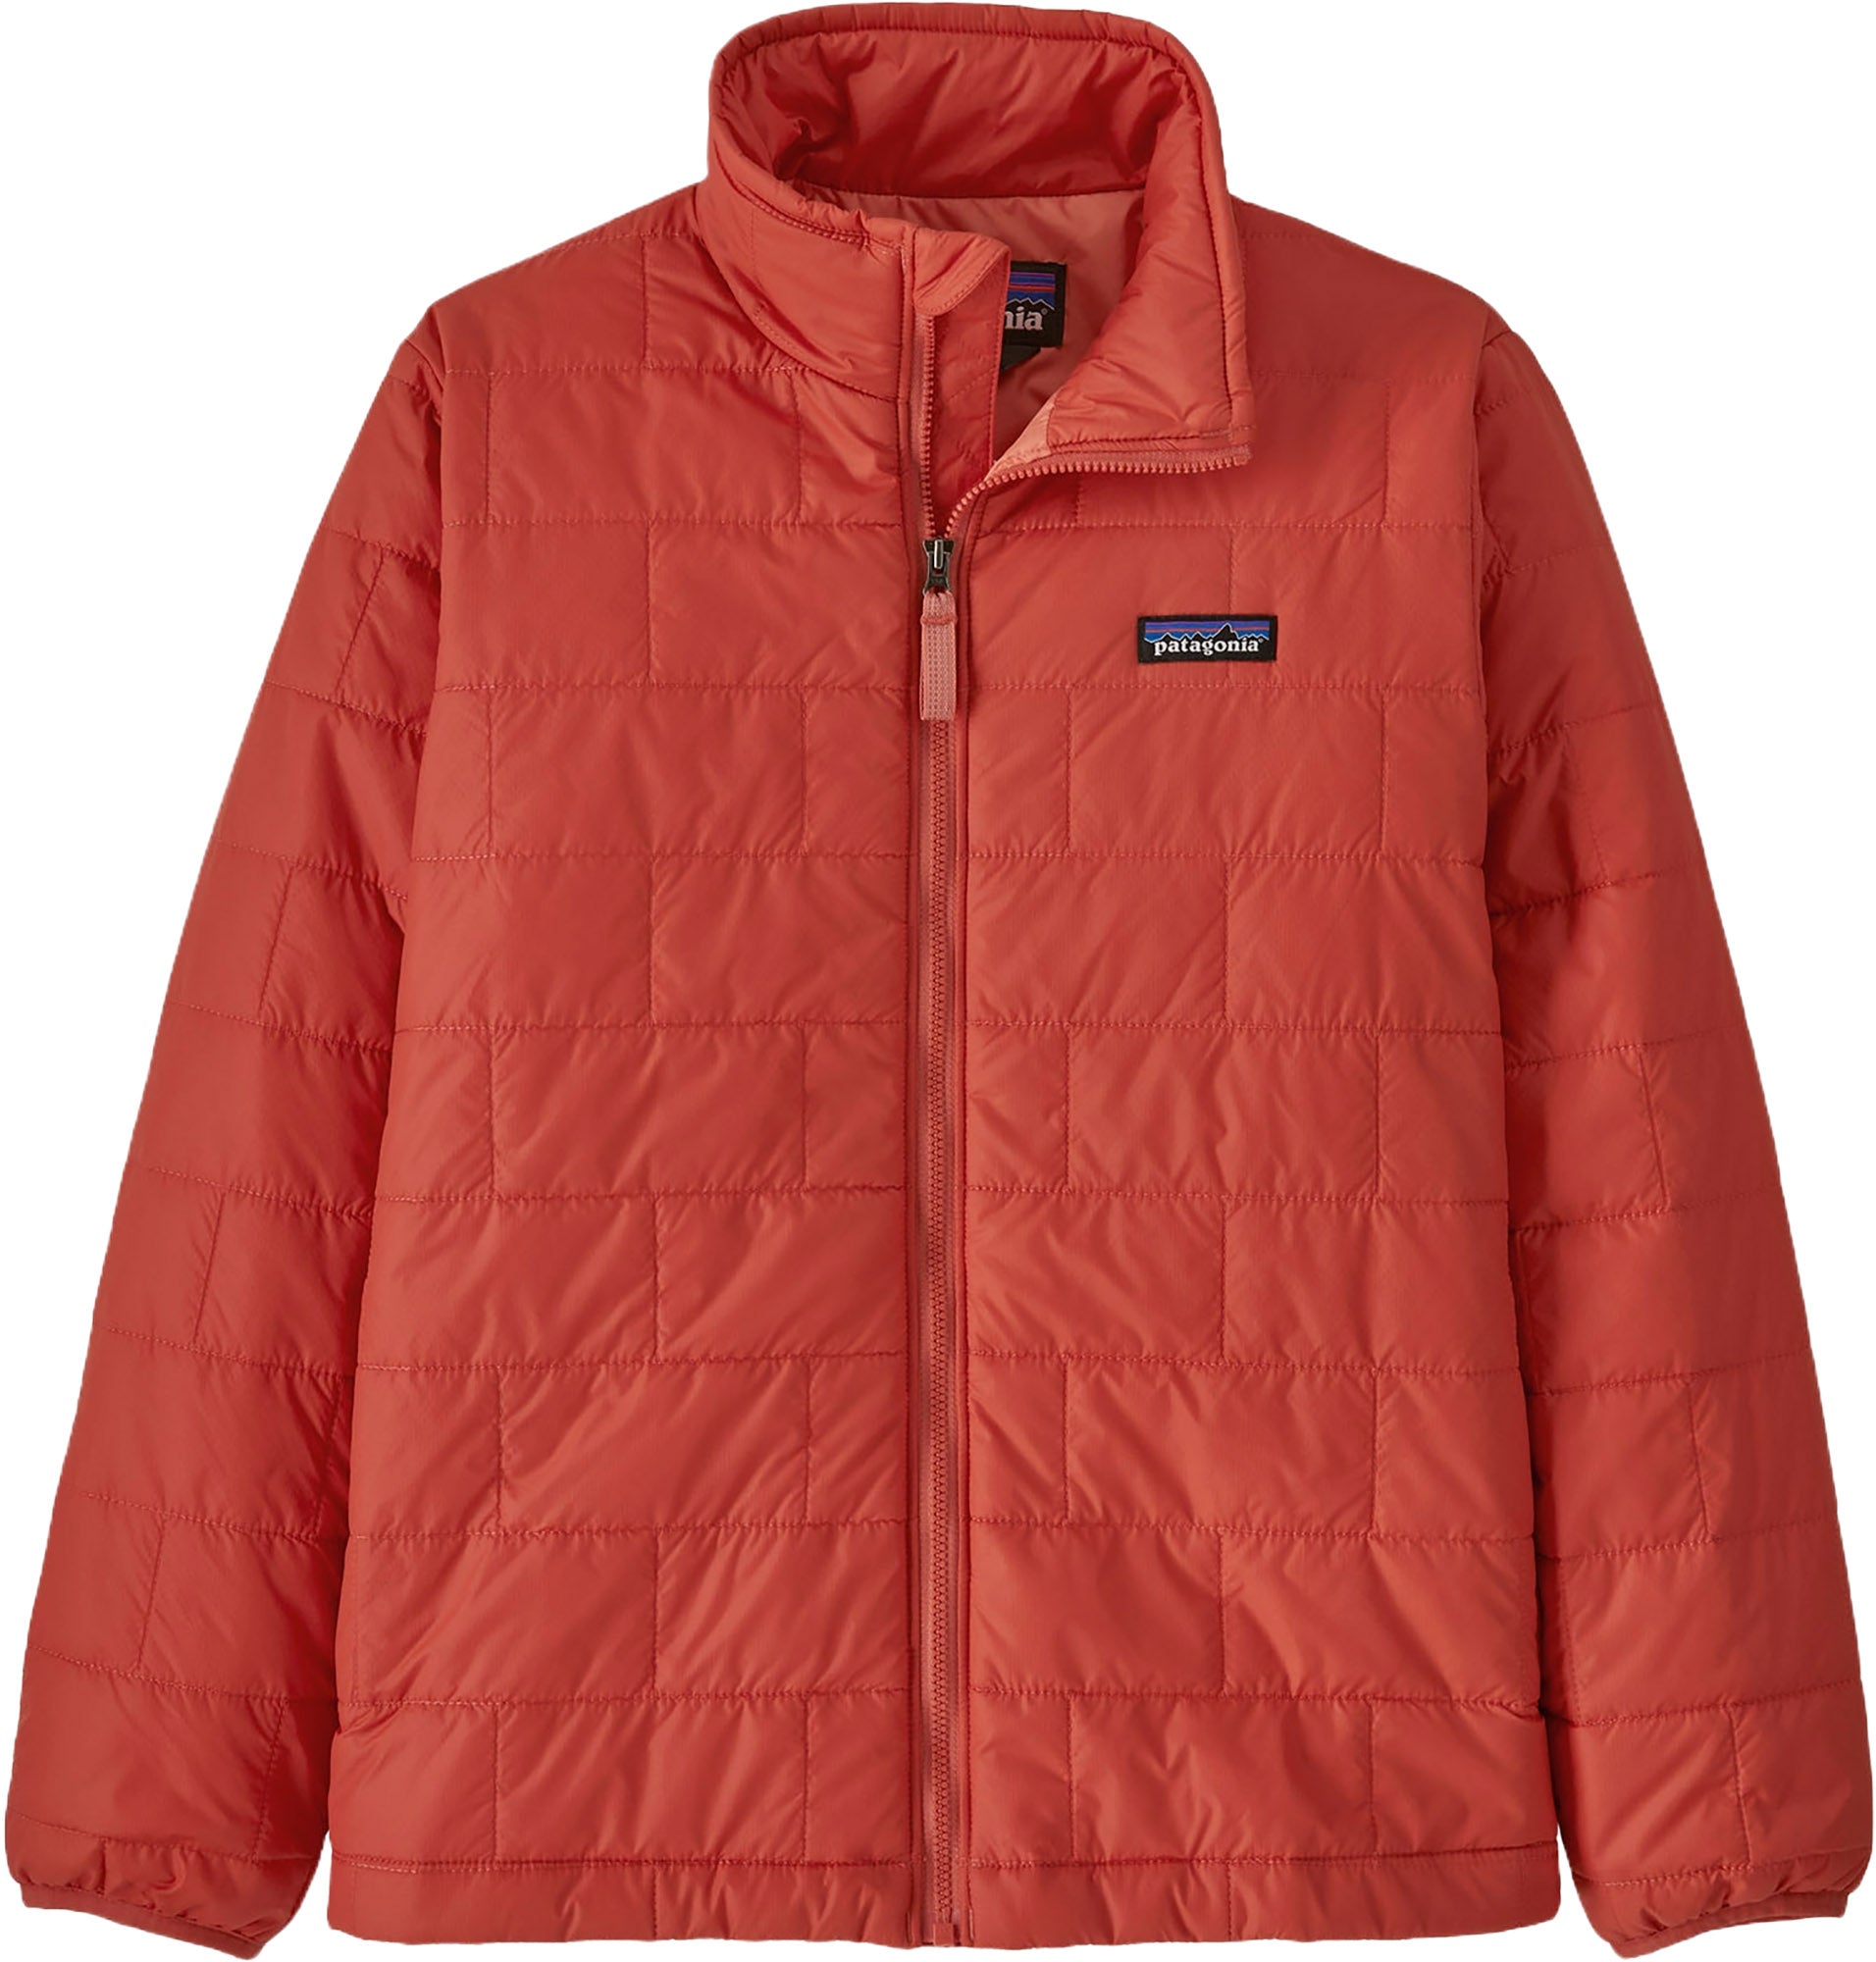 The North Face ThermoBall vs. Patagonia Nano Puff: Which Insulated